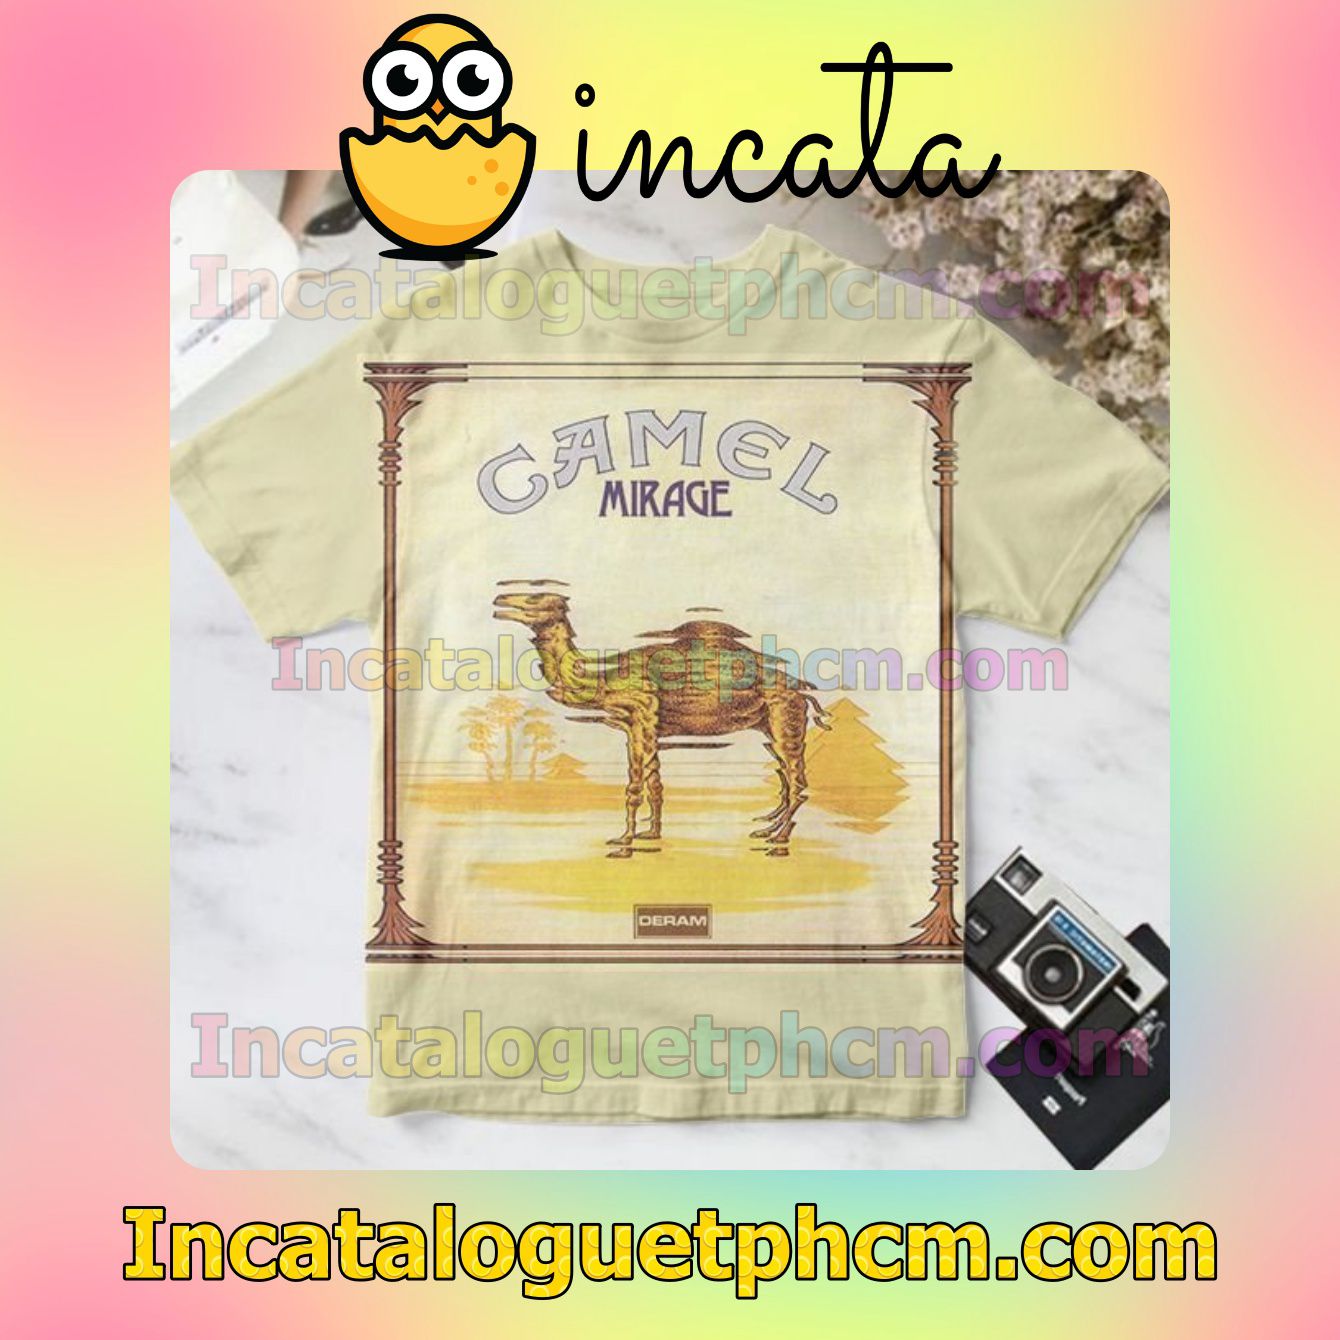 Camel Mirage Album Cover Style 2 Gift Shirt